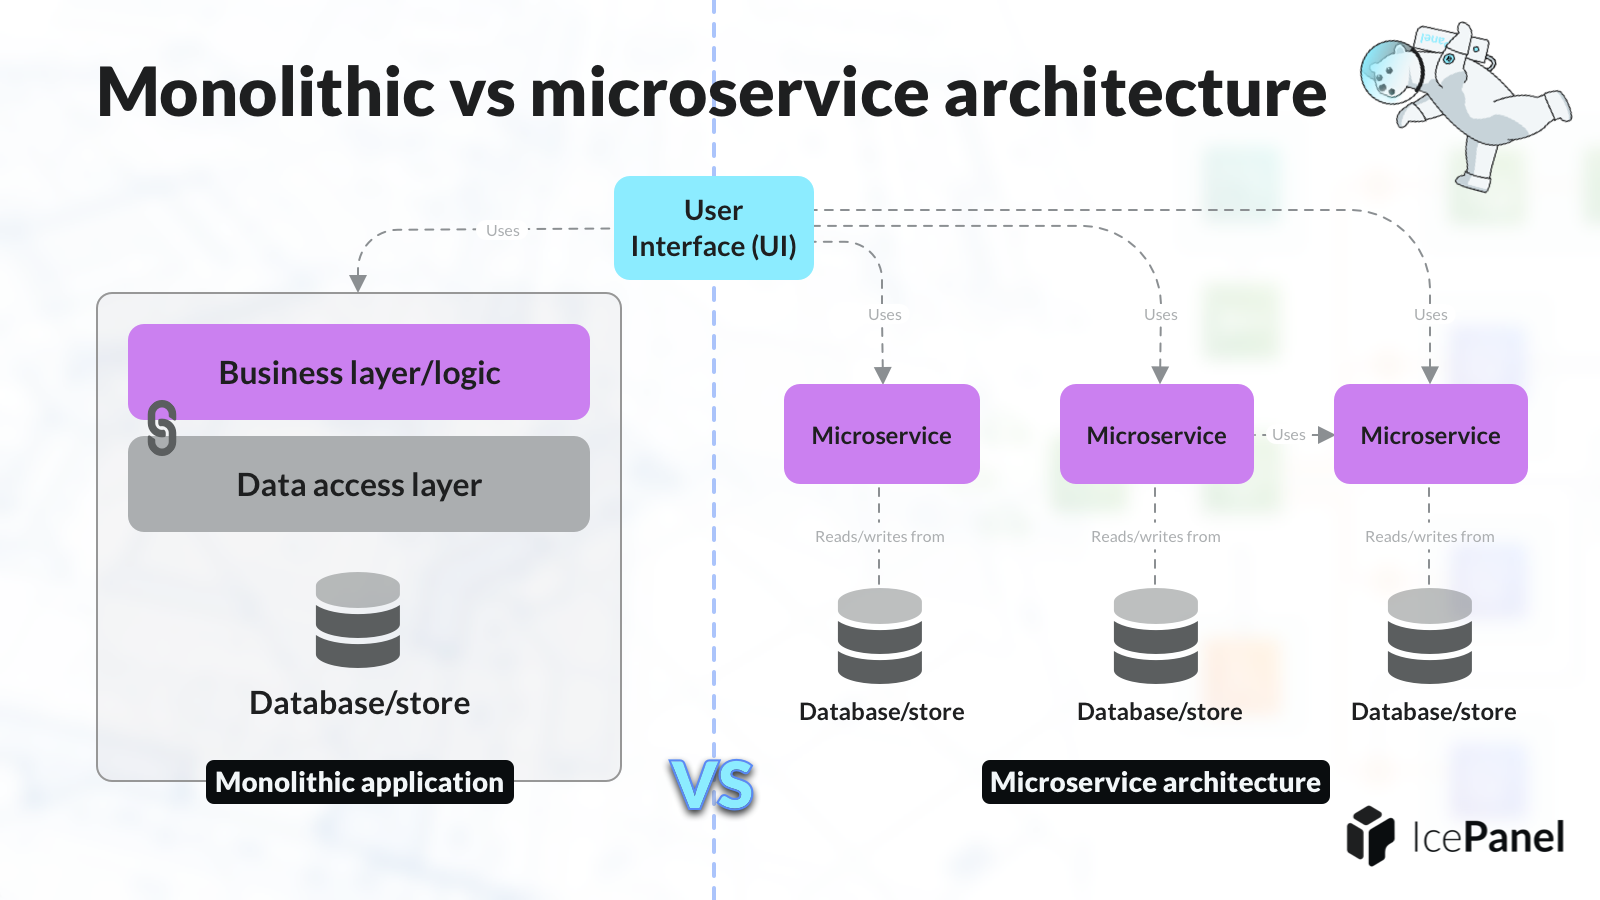 a) 3-tier architecture with application logic monolithic component